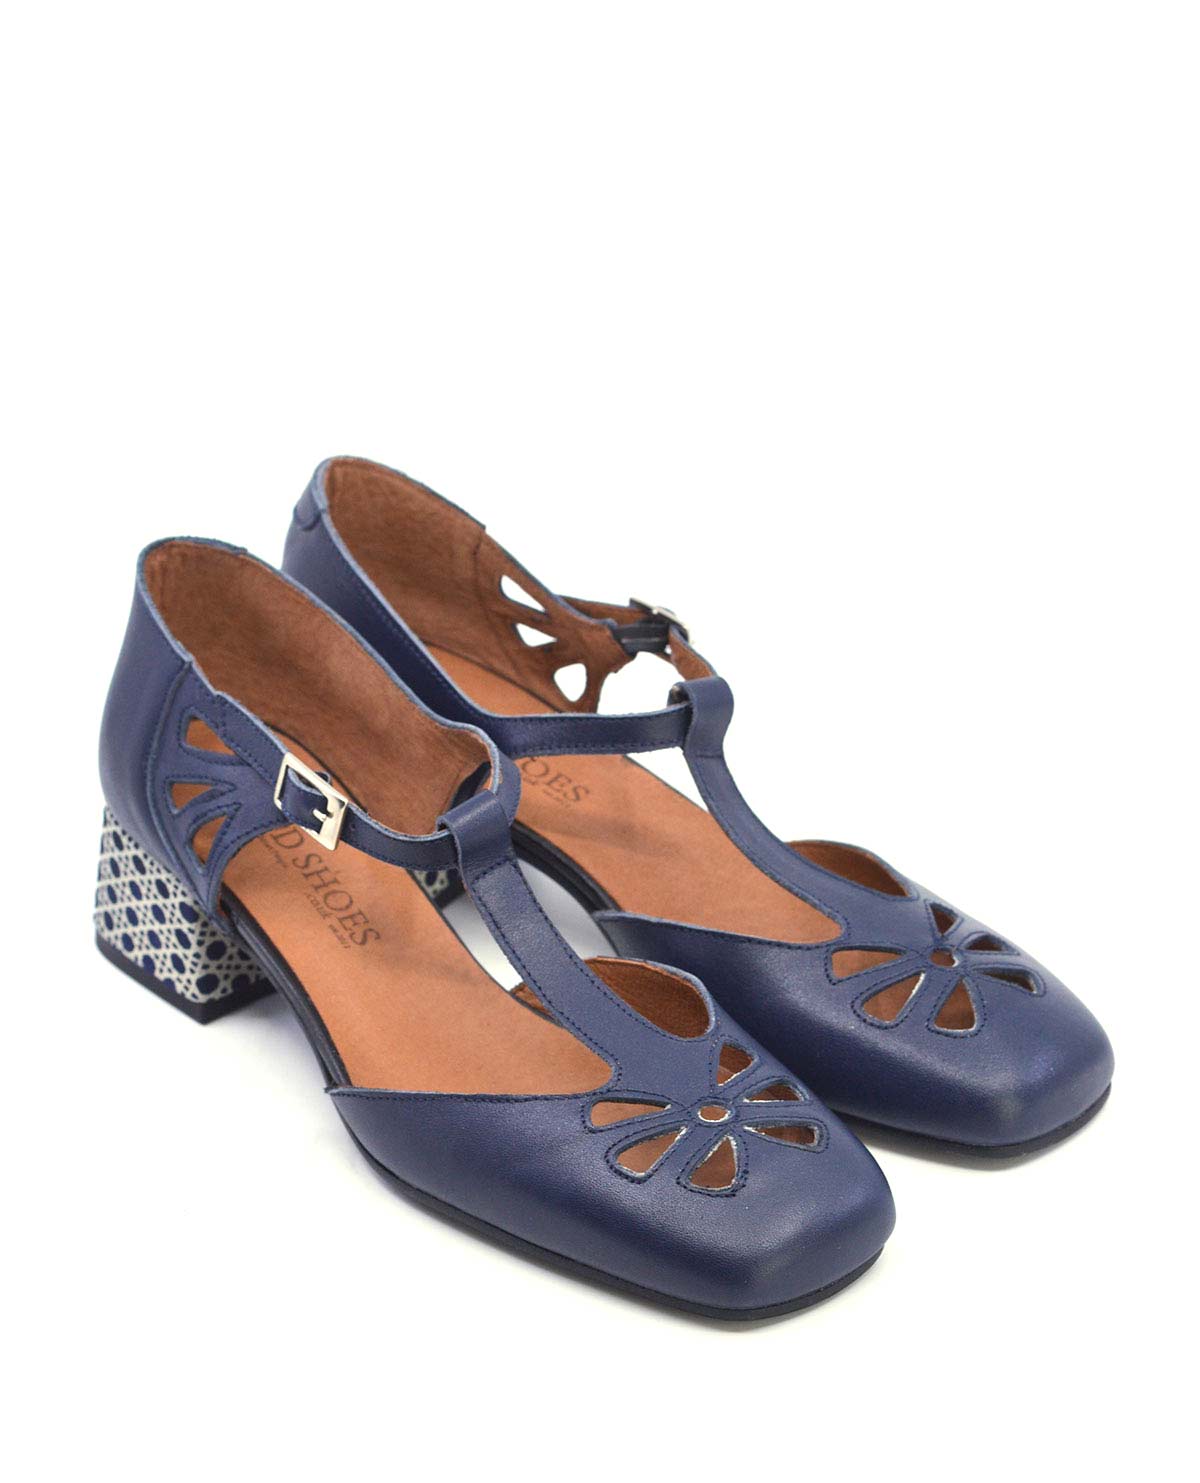 The Zinnia in Dark Navy – Ladies Retro Style Shoe by Mod Shoes 